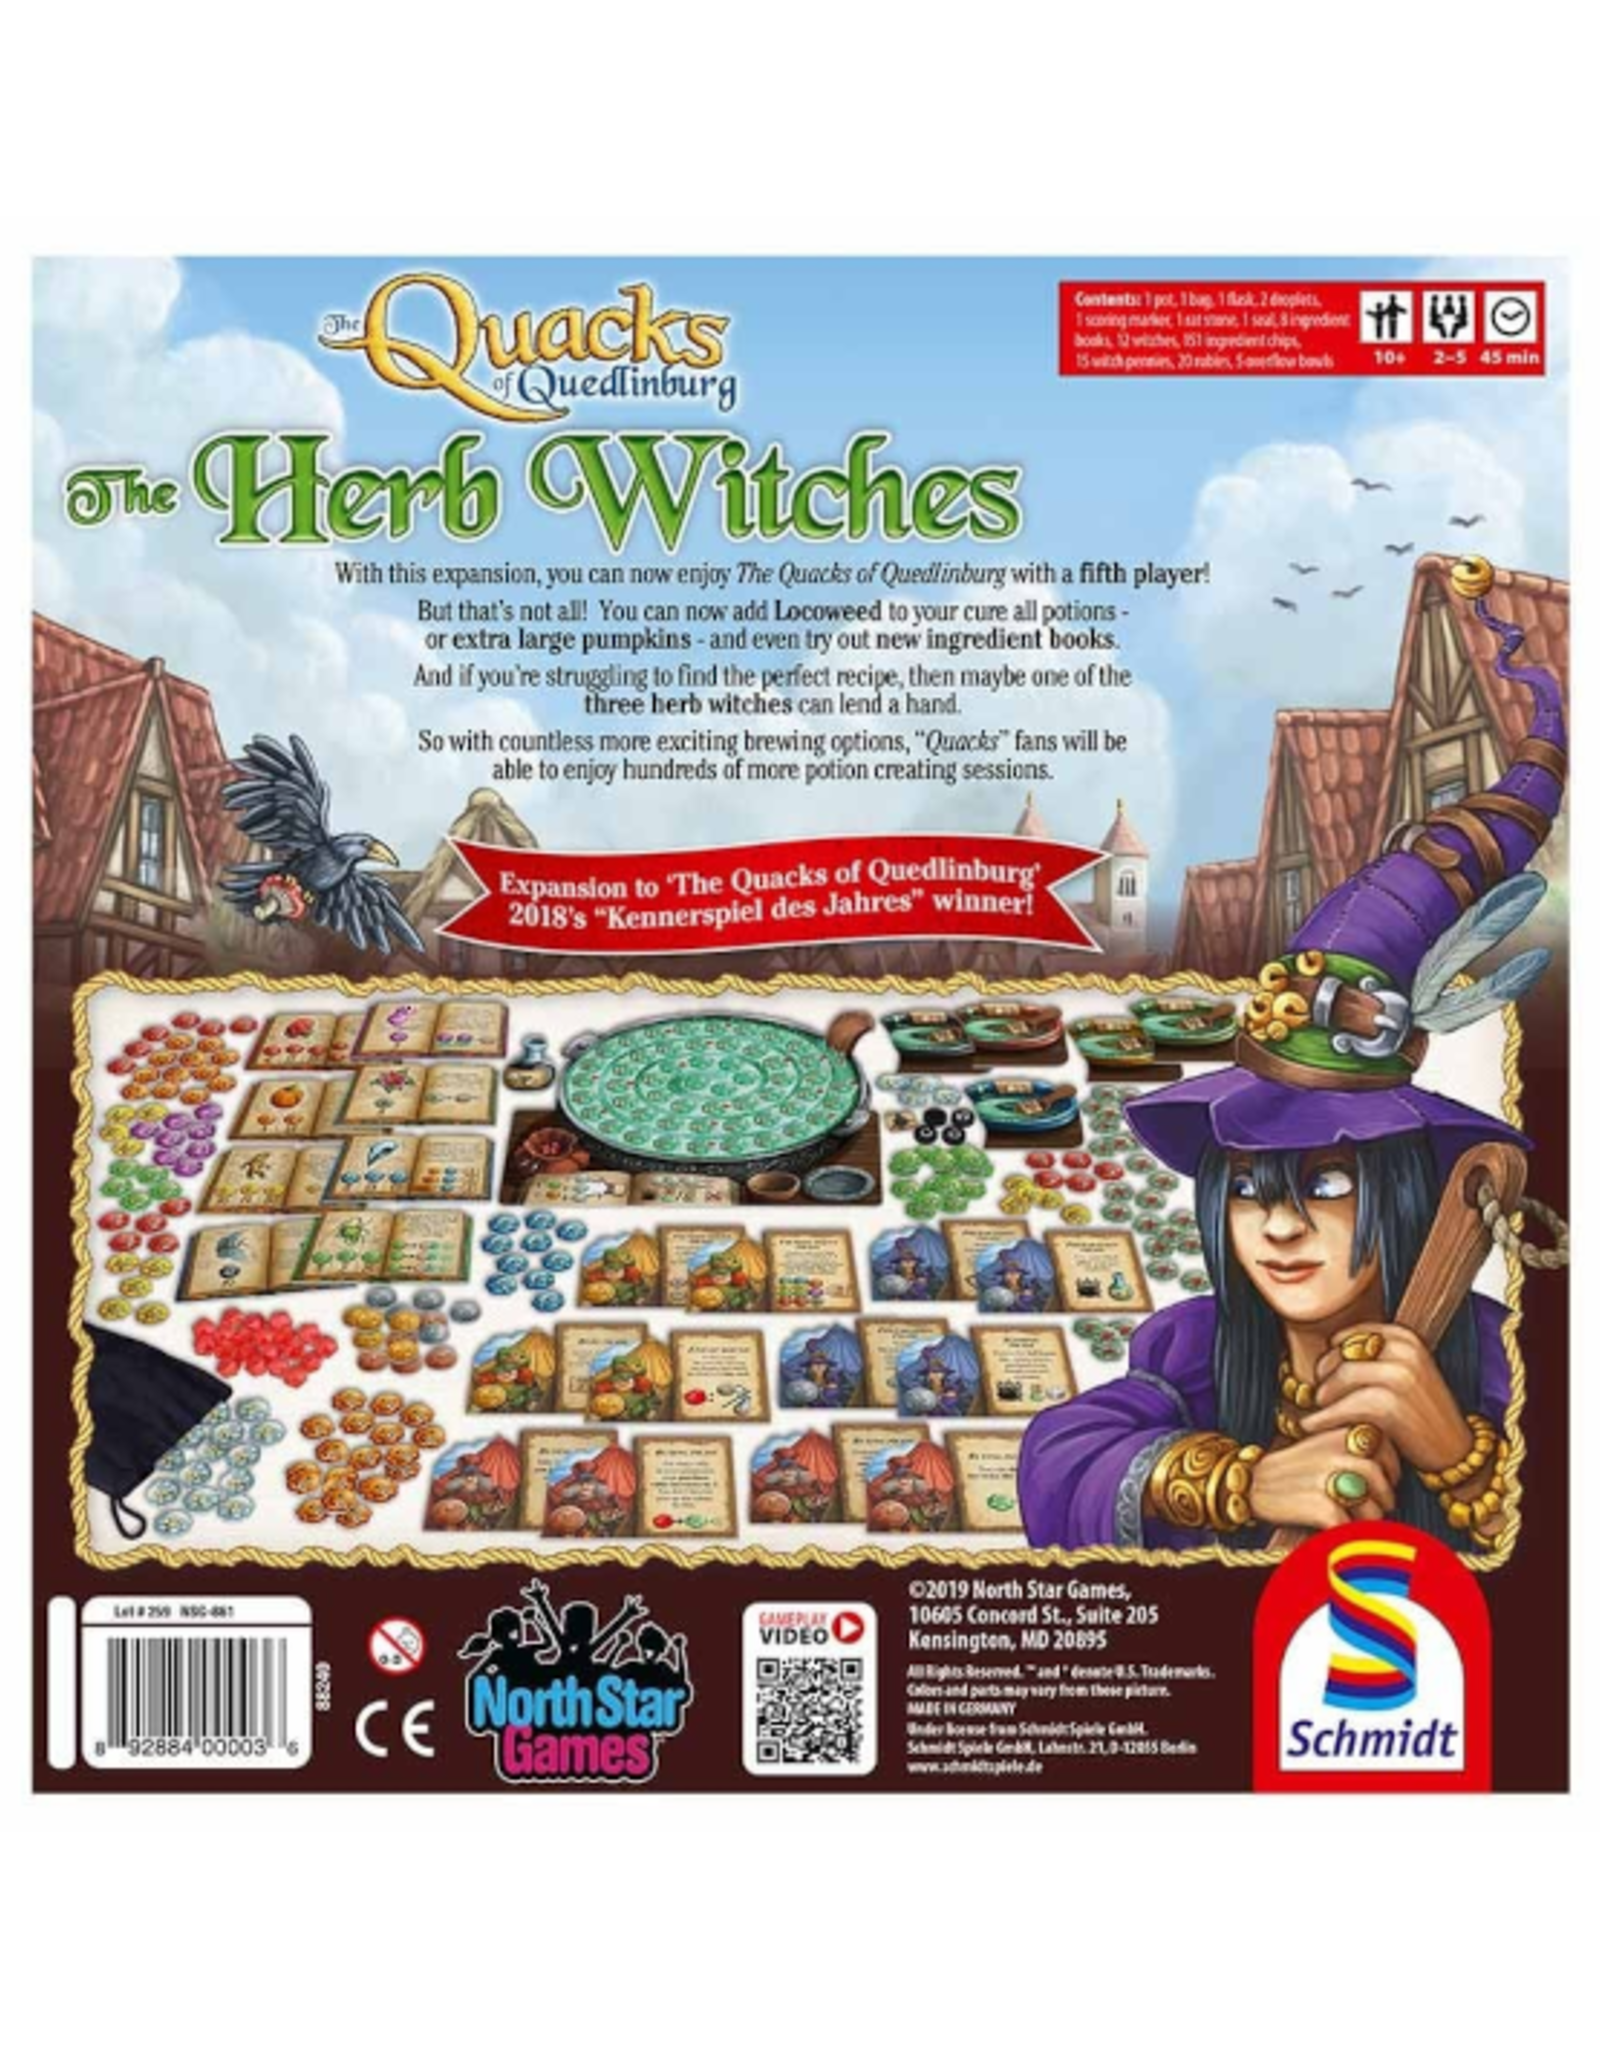 North Star Games North Star Games - The Quacks of Quedlinburg: The Herb Witches